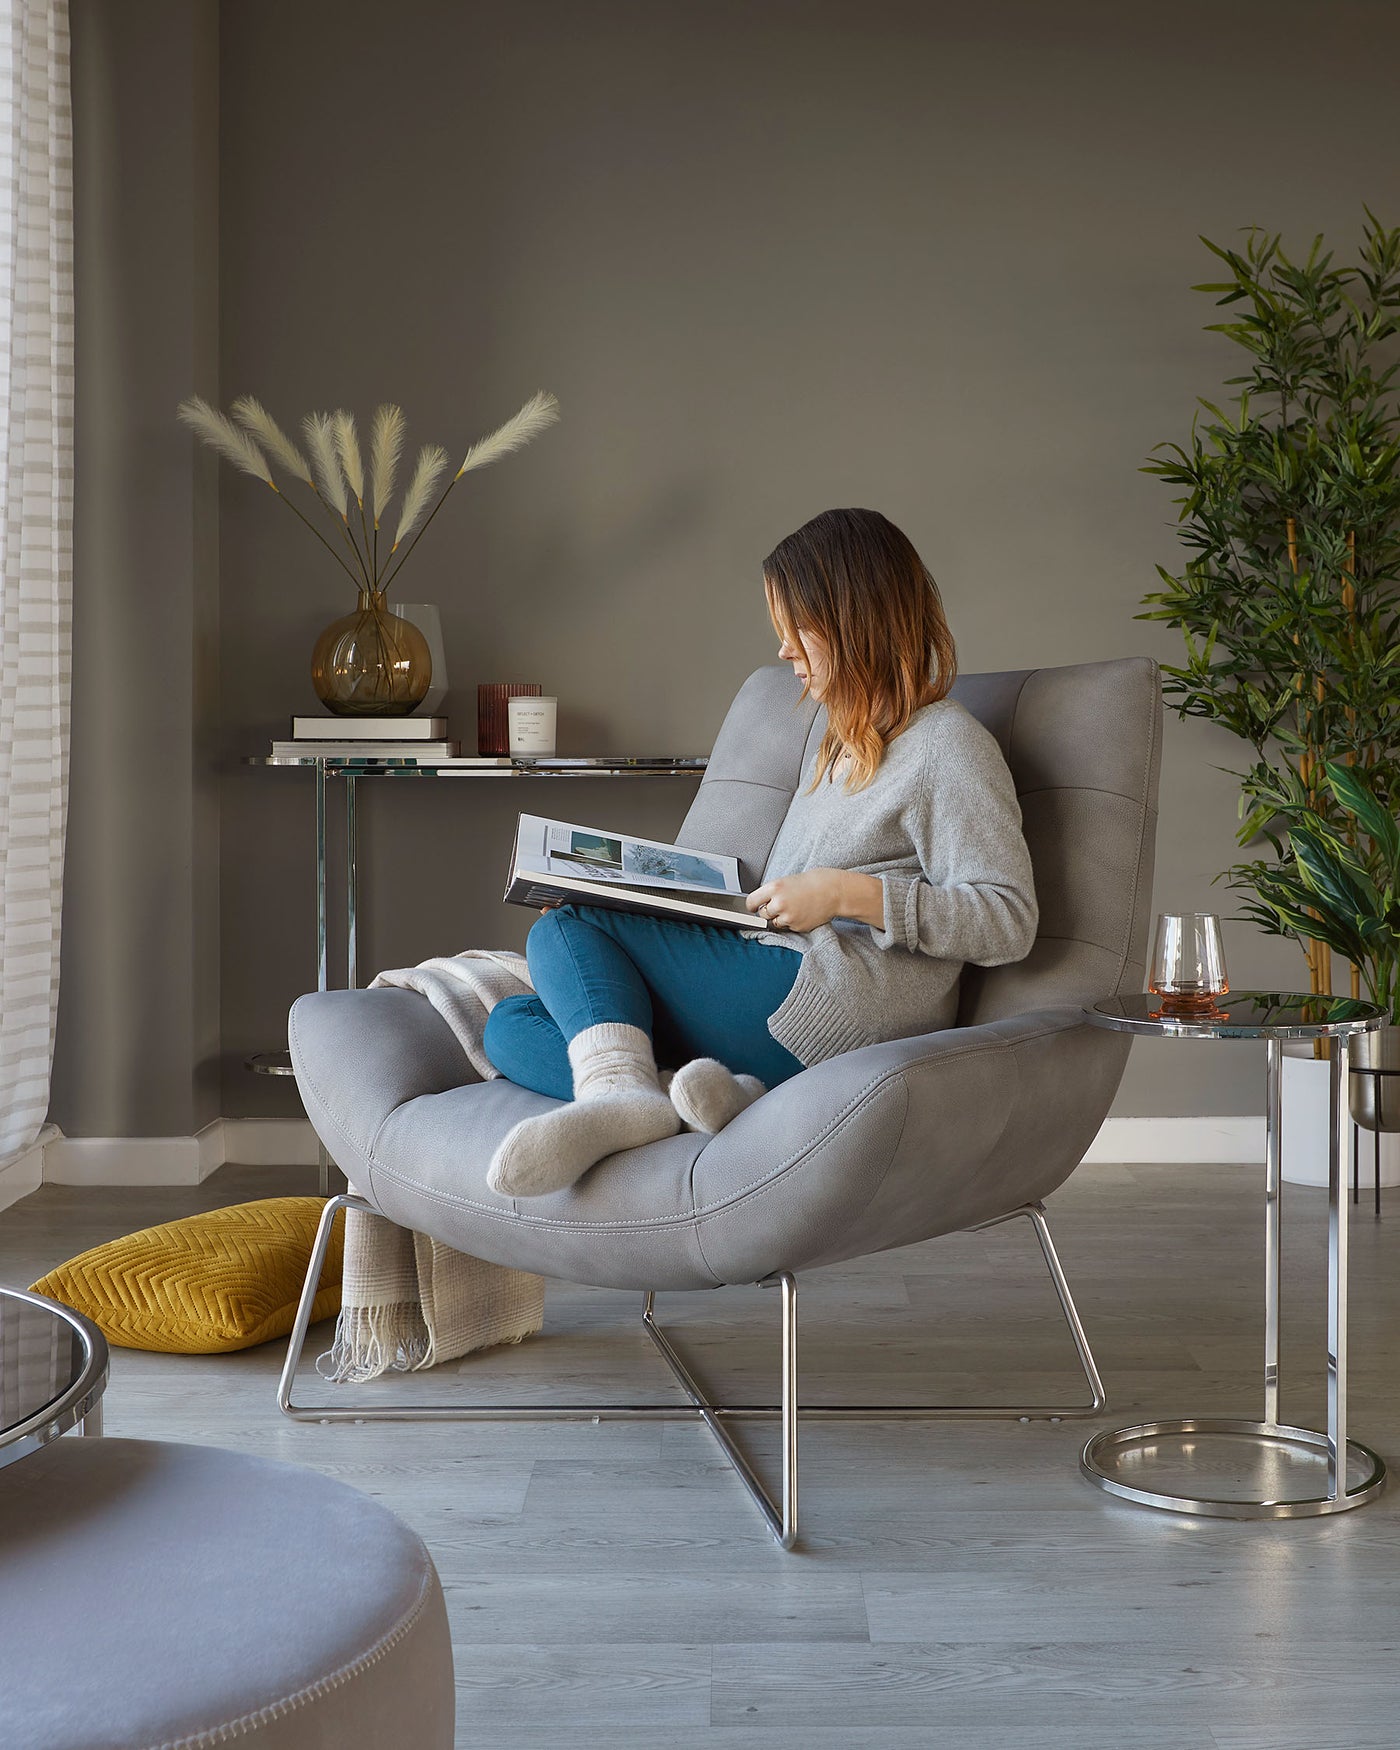 Modern room featuring a light grey upholstered lounge chair with a high back, cushioned seat, and sleek metal legs. Next to it, a round glass side table with a polished metallic frame. A cylindrical grey fabric ottoman is also visible in the foreground. The scene conveys a contemporary, cosy atmosphere ideal for reading and relaxation.